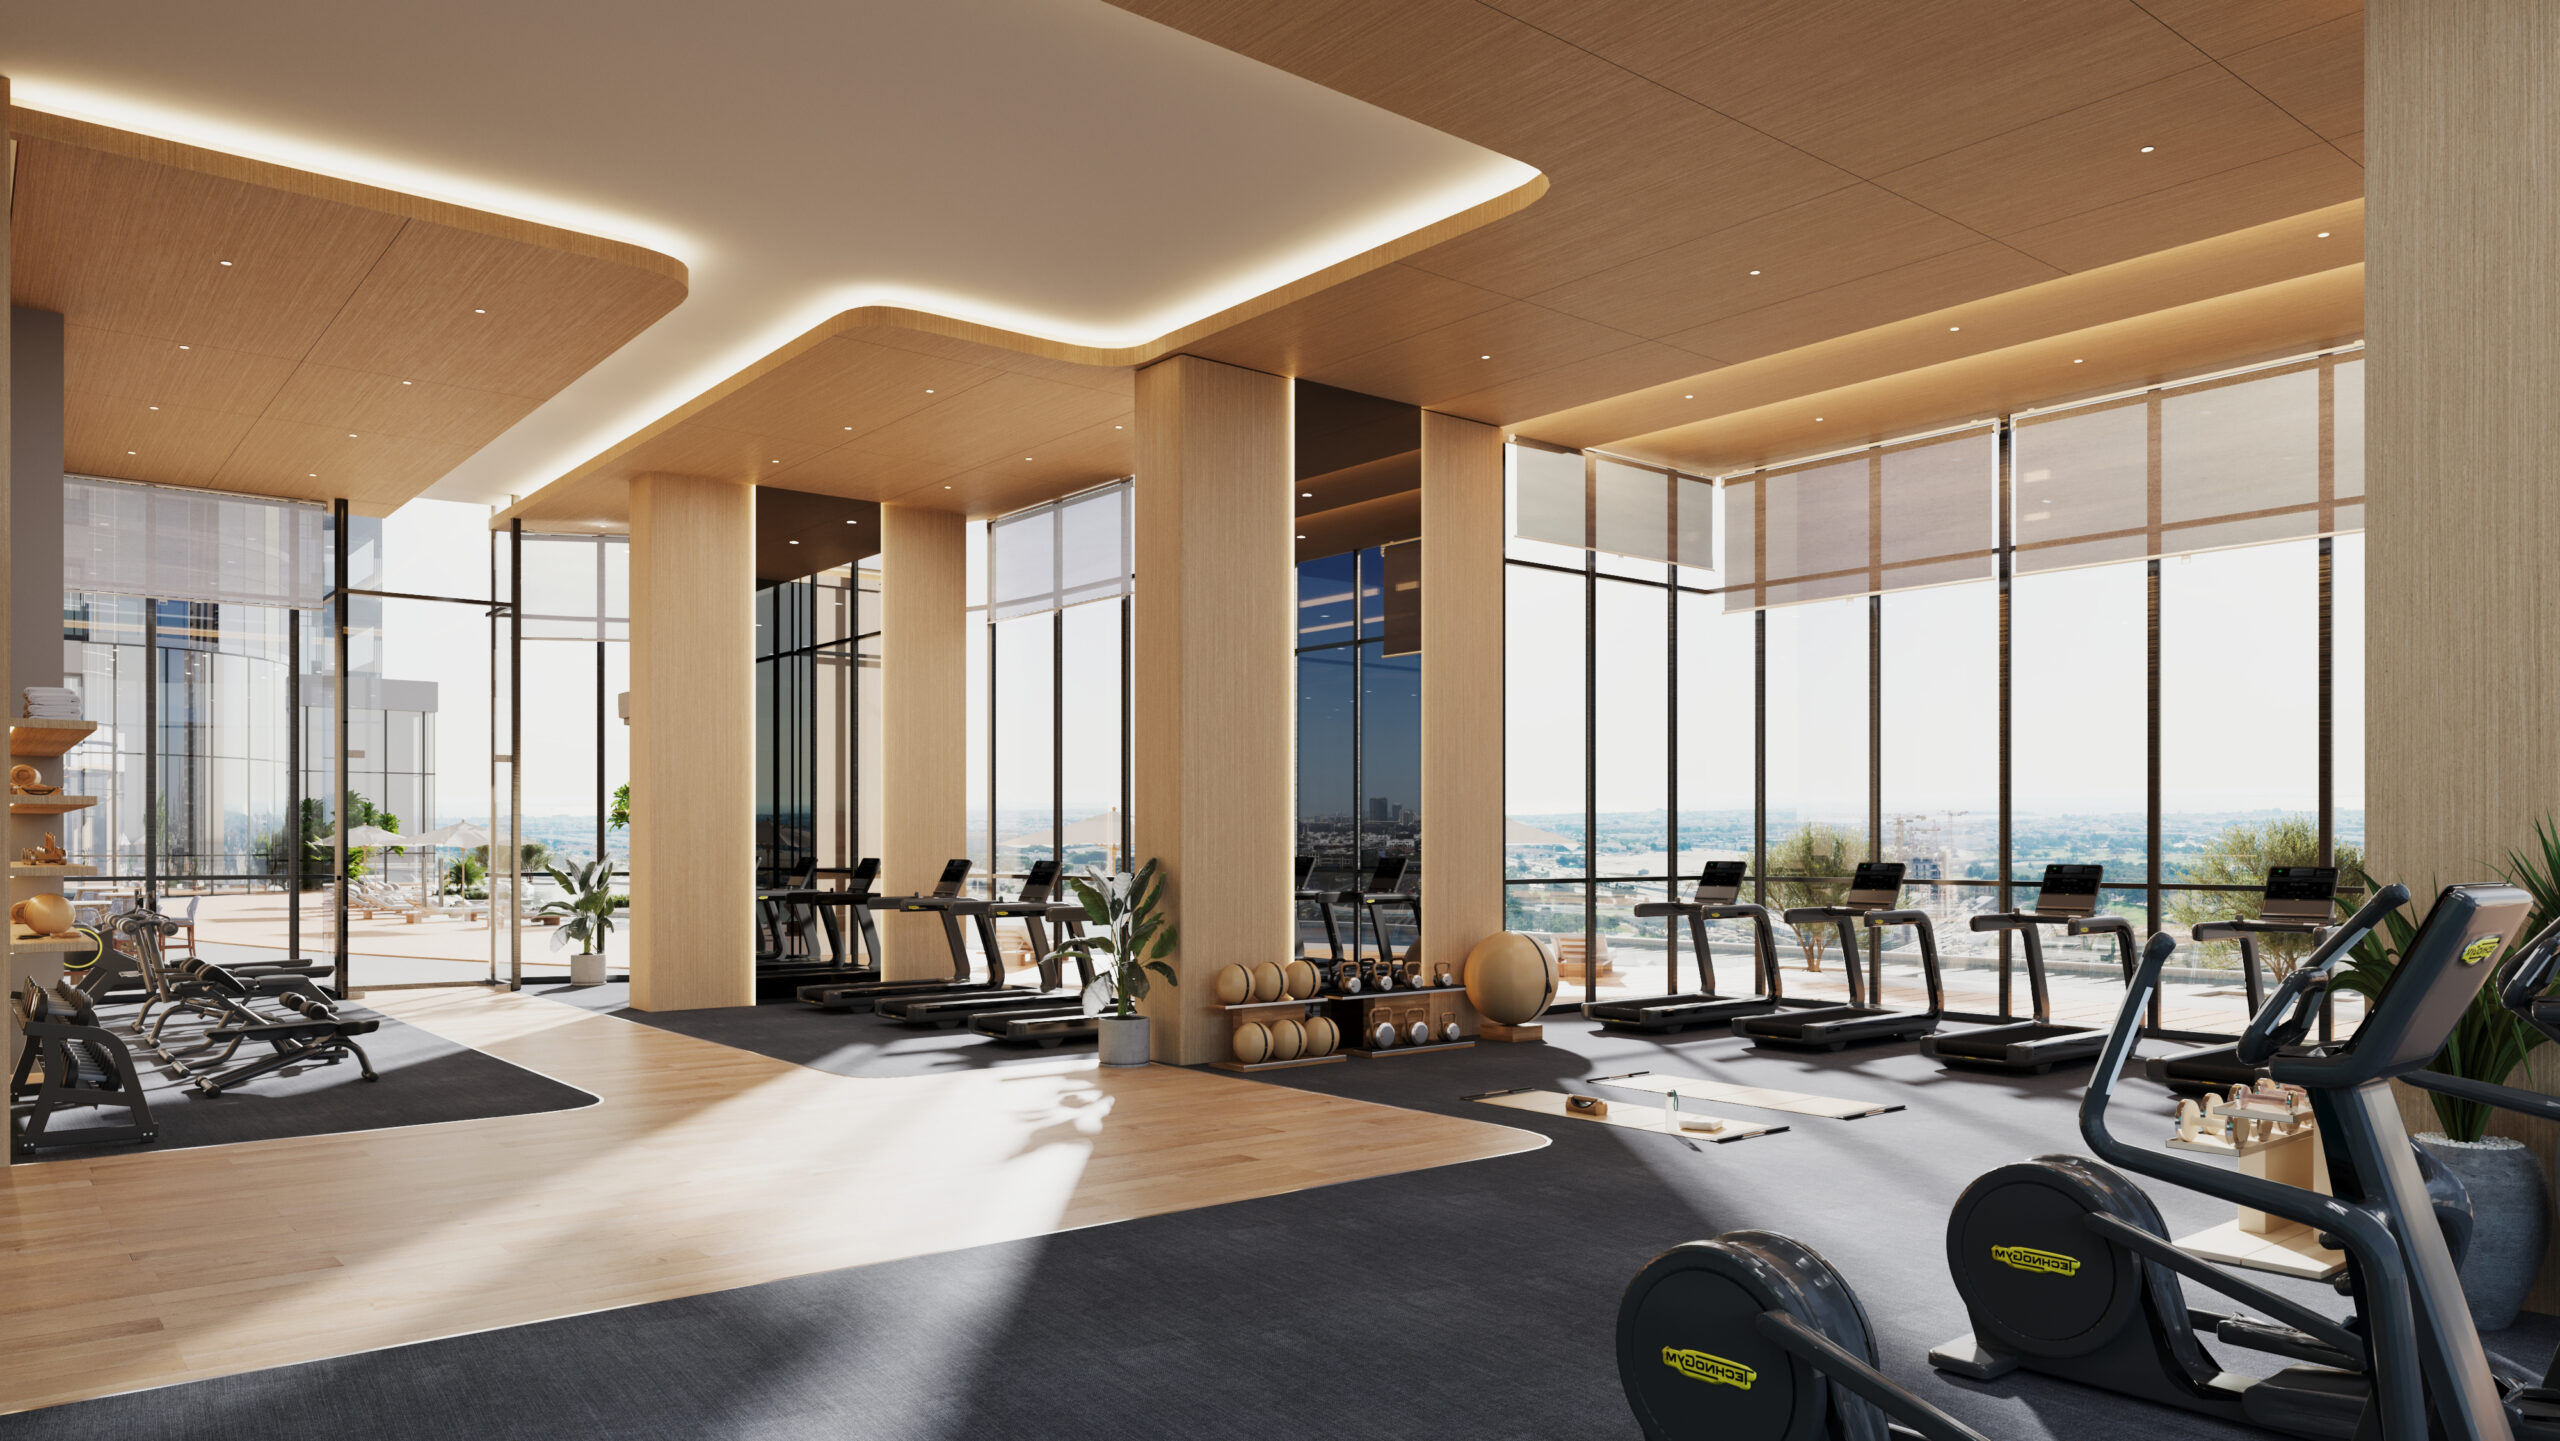 State of the art gym with treadmills, weight lifting equipment and yoga studio adjacent to pool deck